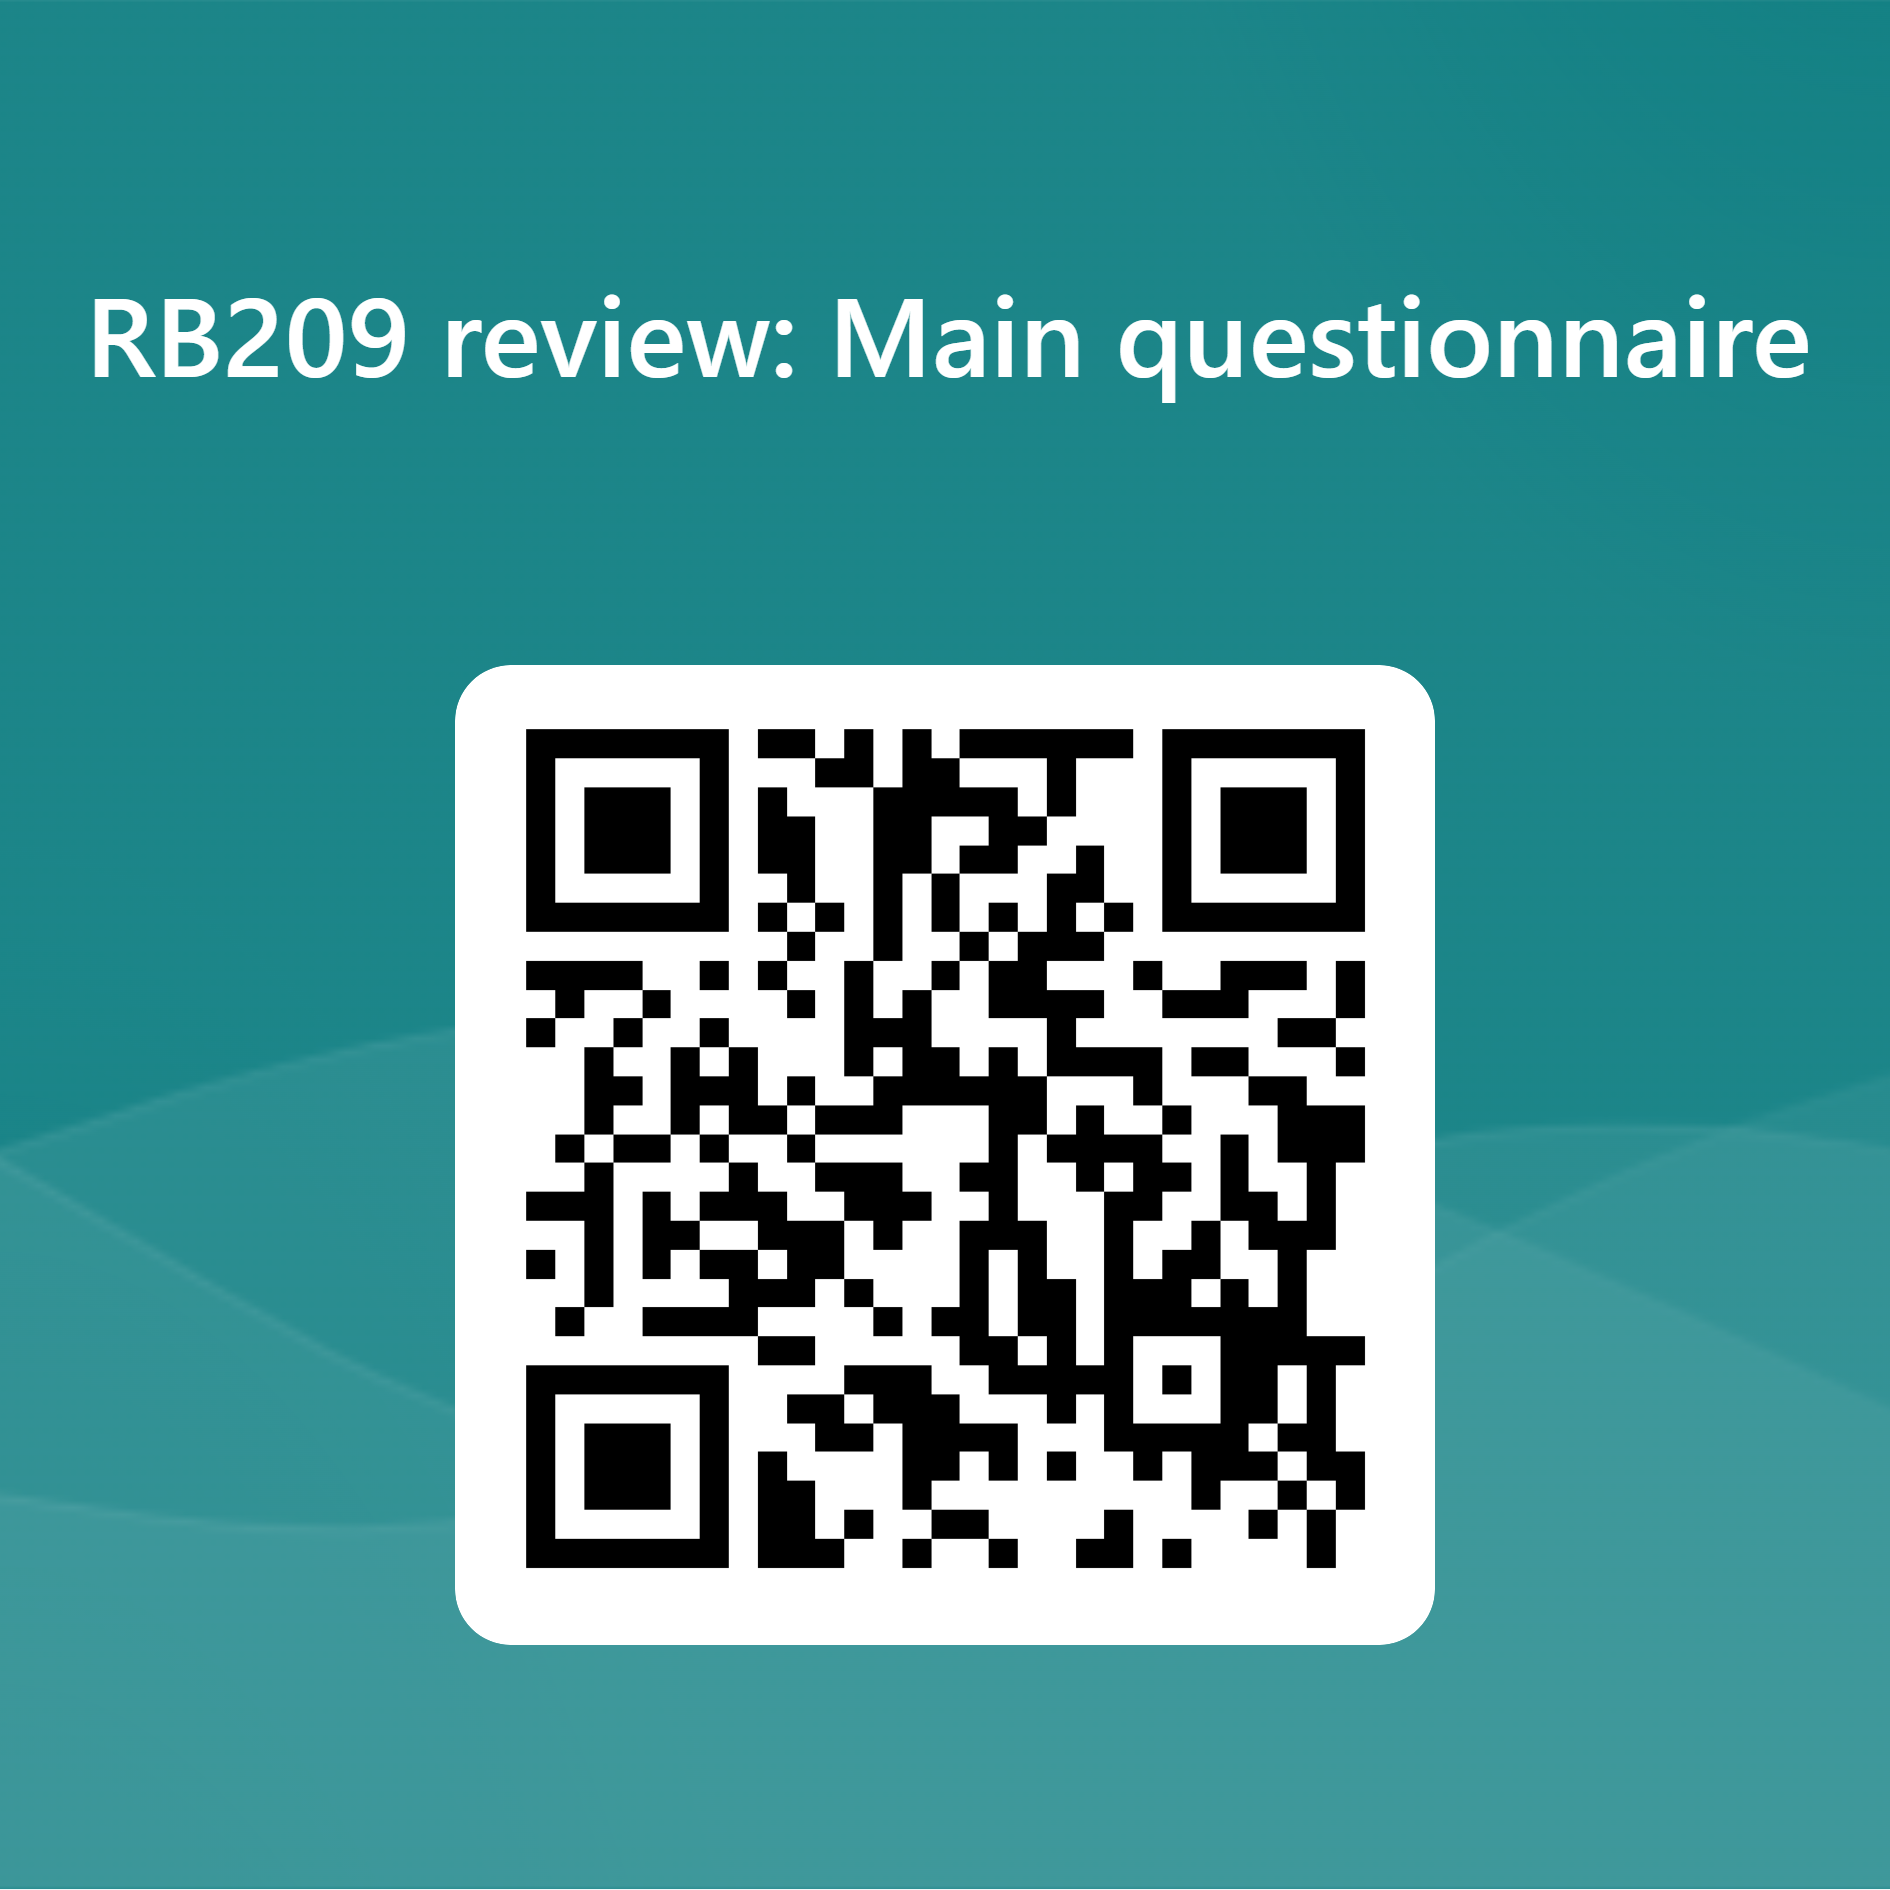 QR code for RB209 review main questionnaire